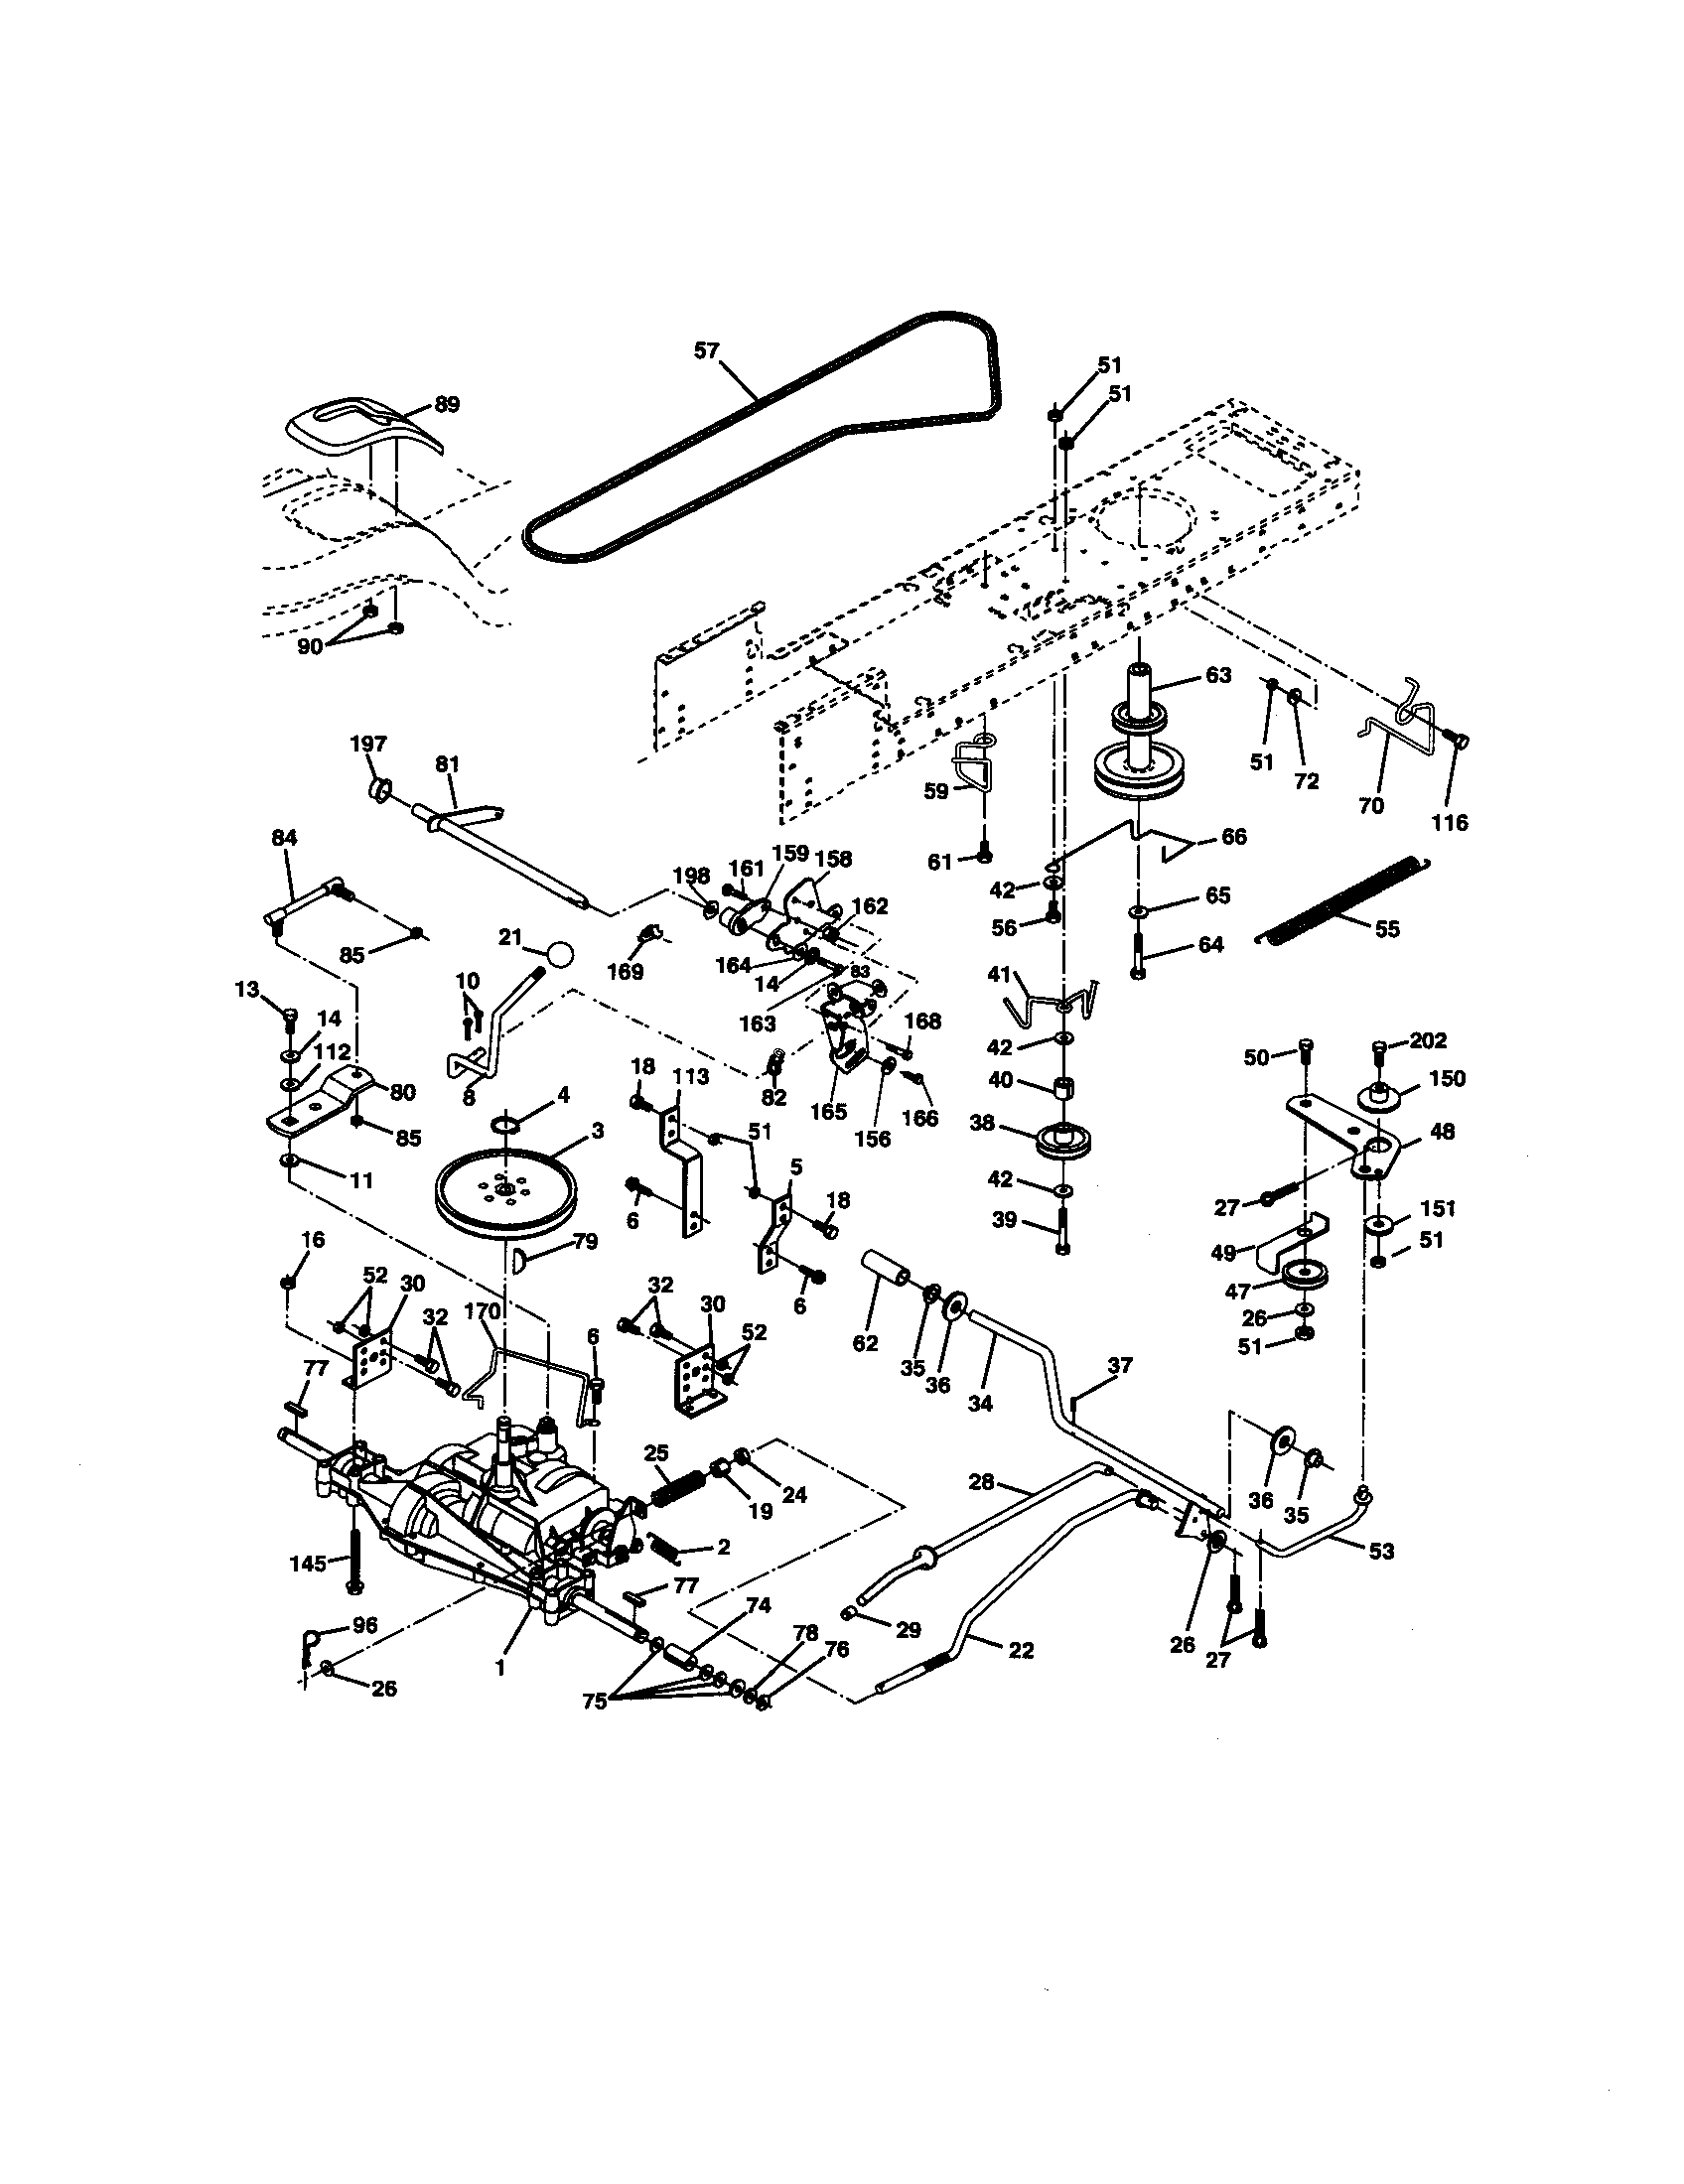 Craftsman Riding Mower Parts Diagram Looking For Craftsman Model 917270671 Front Engine Lawn Tractor